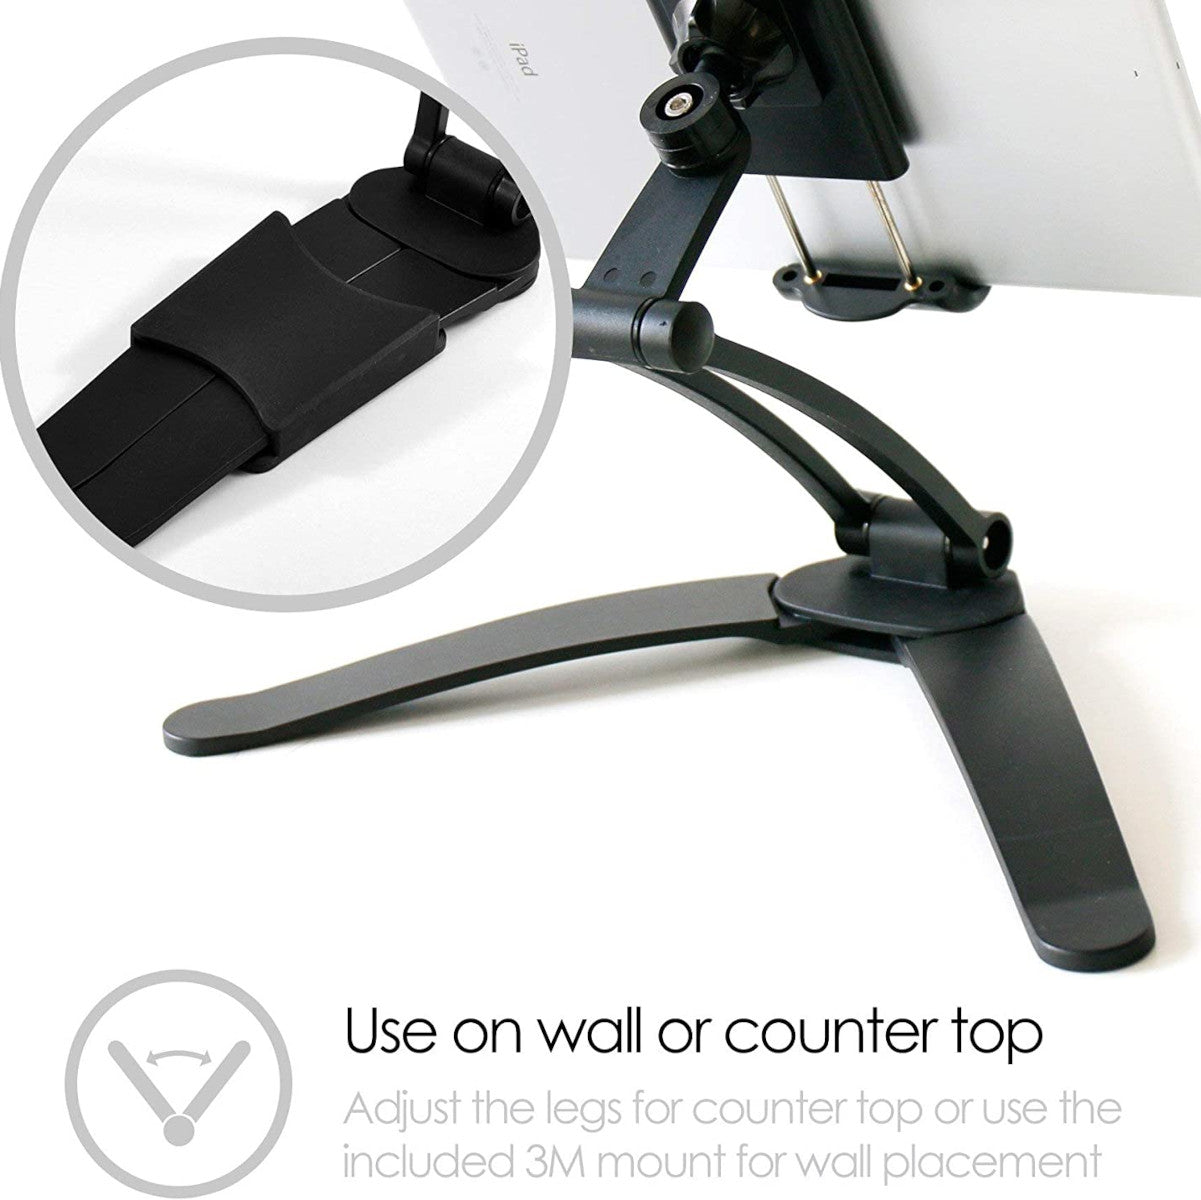 A Mount stand holder for Tablet or Smartphone. The easy adjustment of the viewing angle using 4mm allen bolts can be seen . 360 ball joint.  Text on the image reads "Use on wall or counter top" and "Adjust the legs for countertop use or use the included 3M mount for wall placement. "